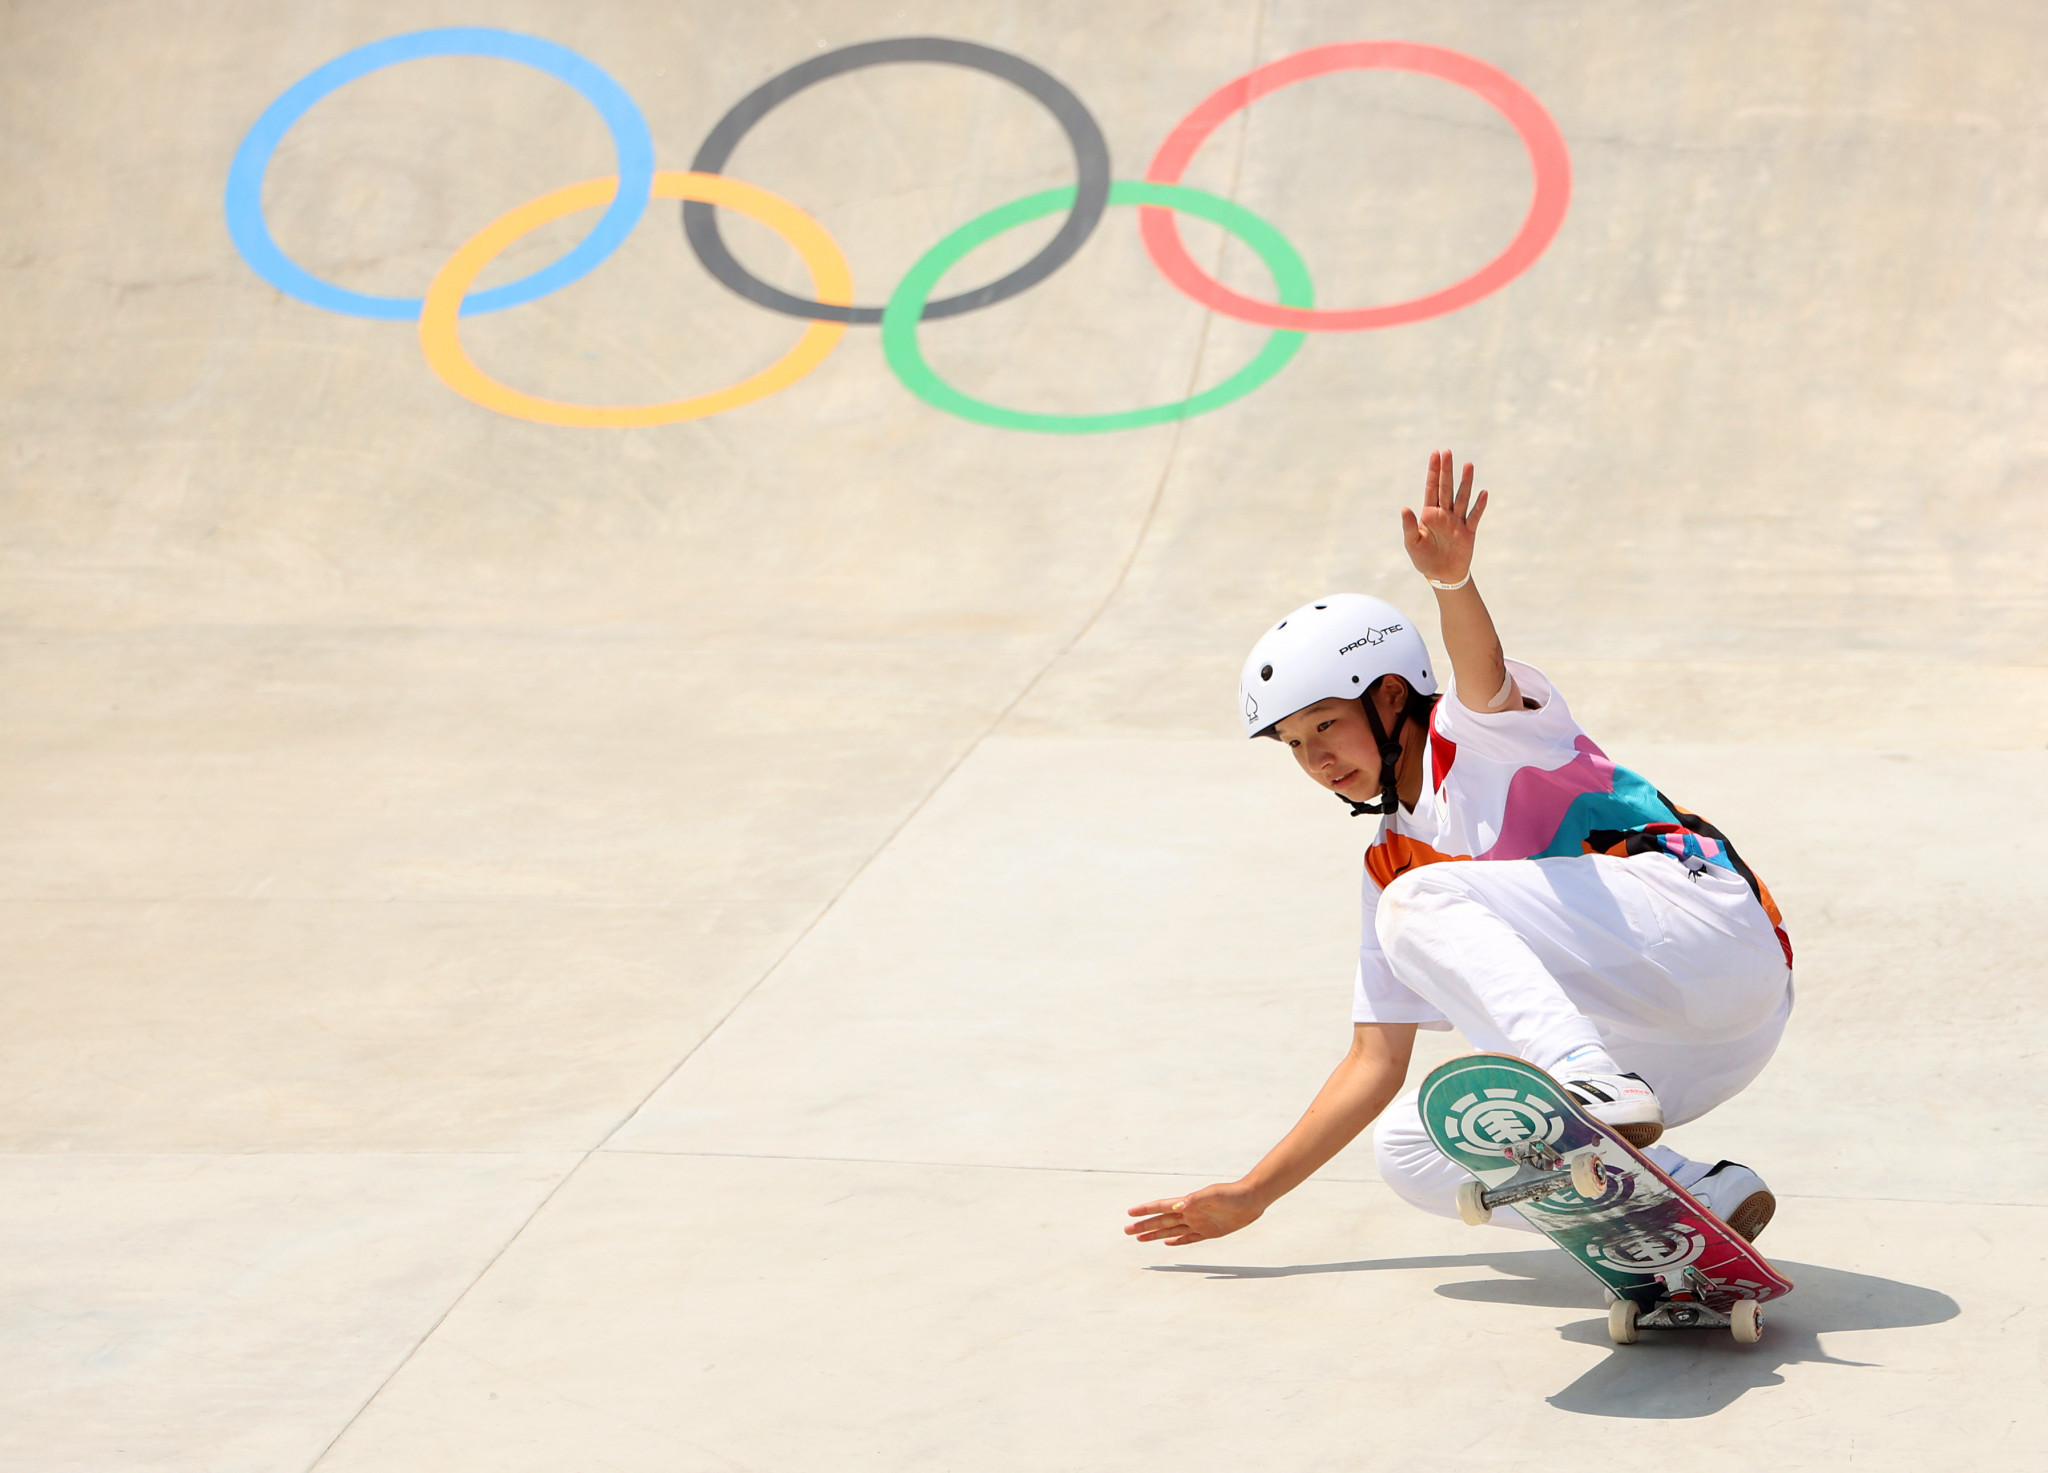 Paris 2024 skateboarding qualification period set to begin in June with three events